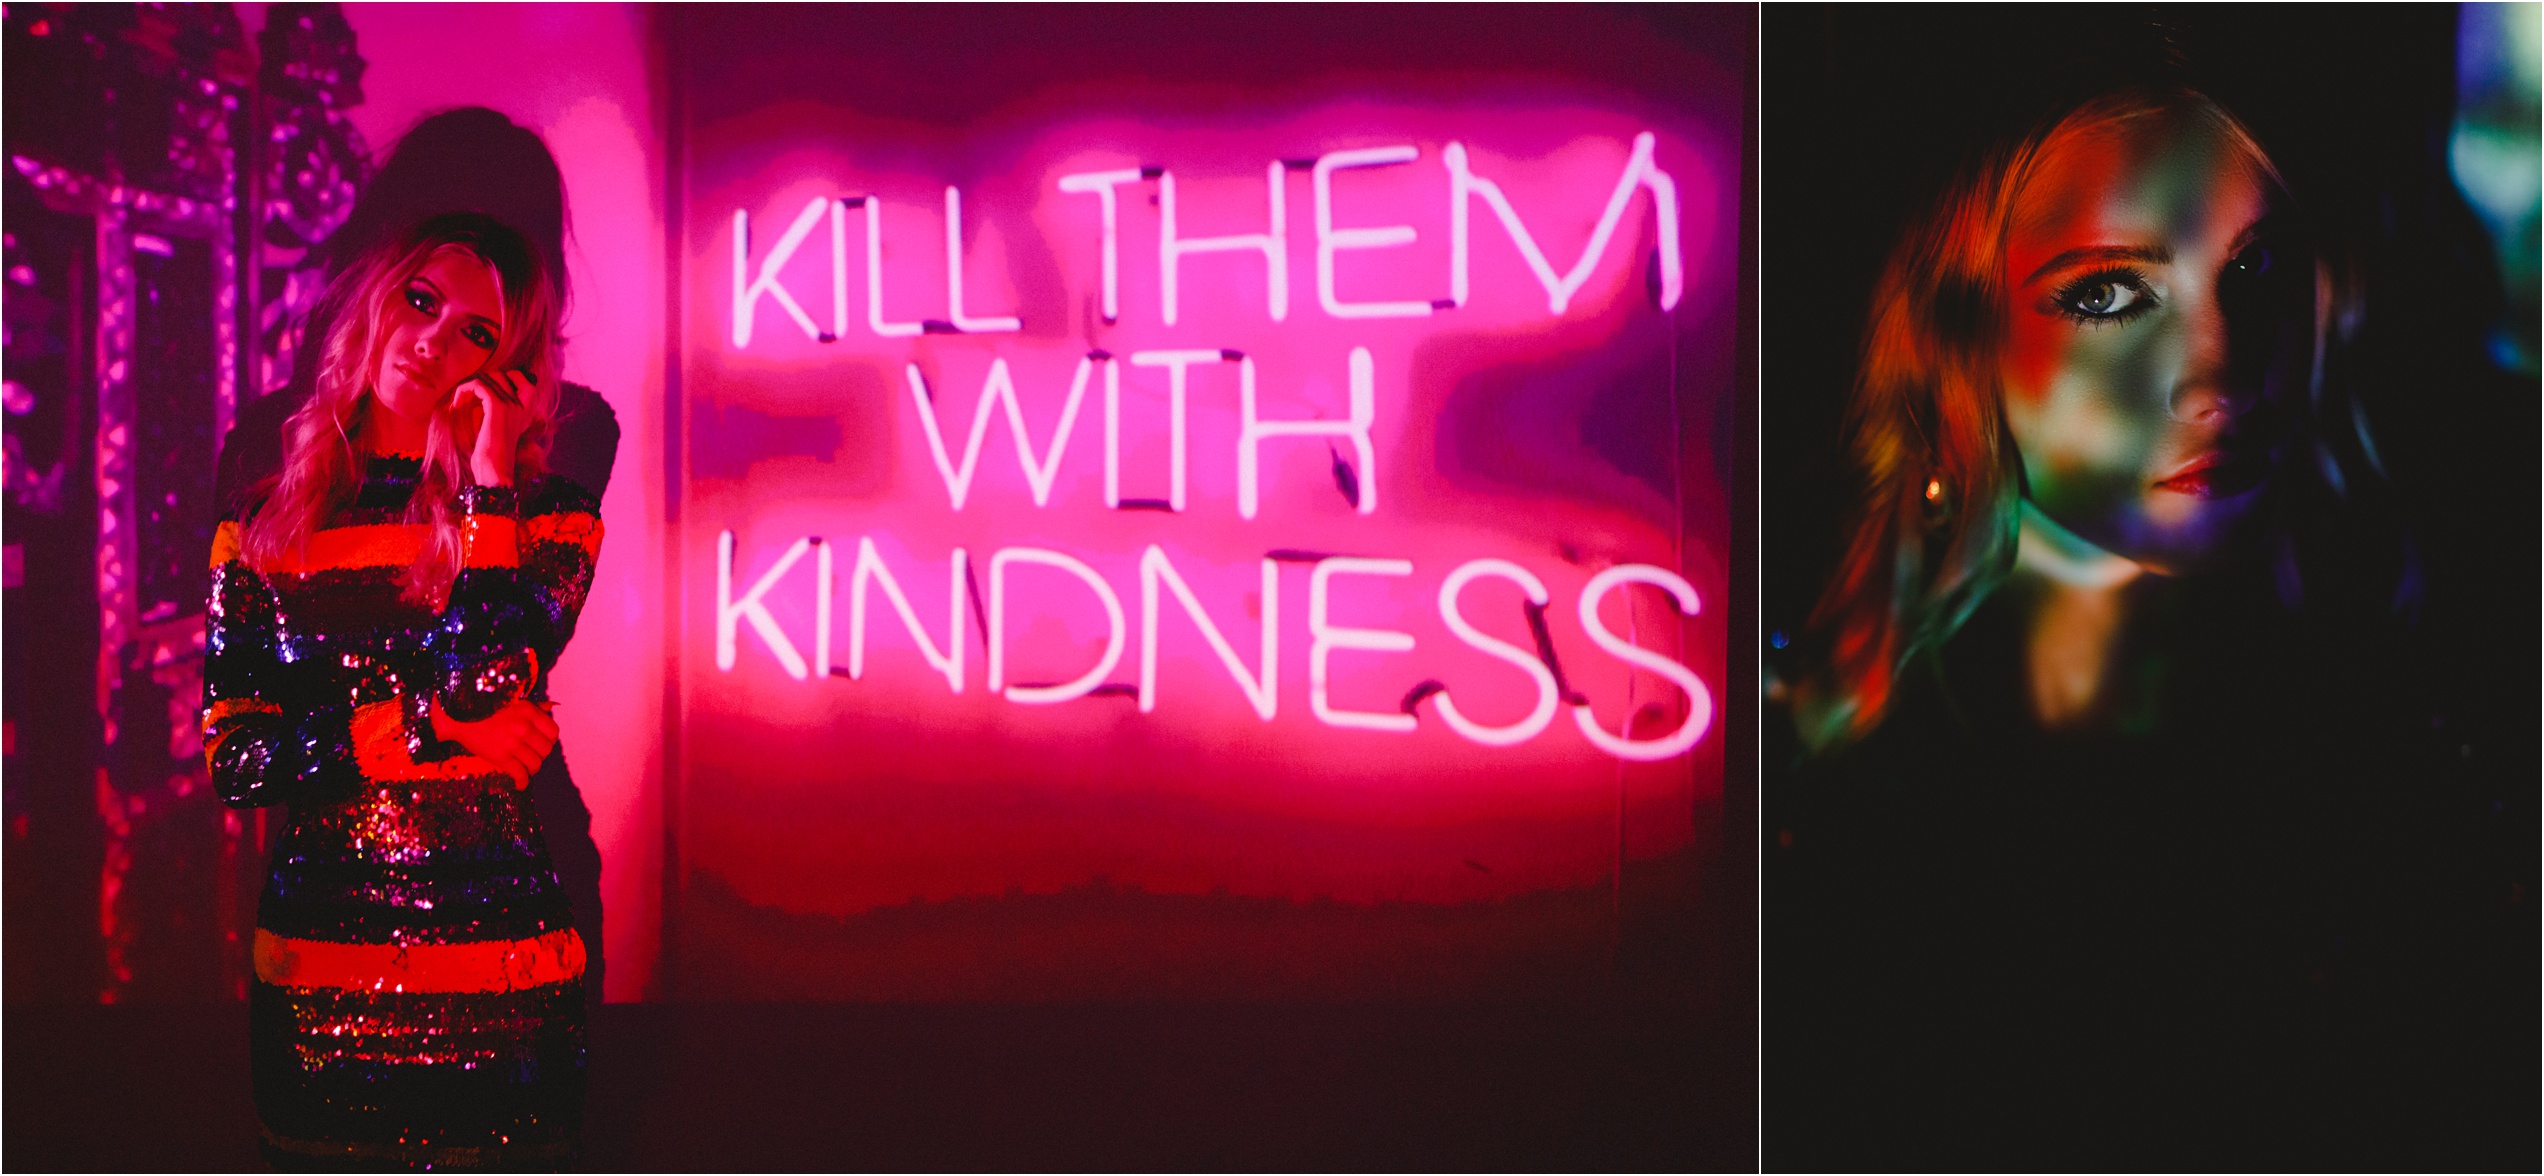 Andrina posing next to neon sign that reads "Kill them with Kindness" in a striped sequin dress.